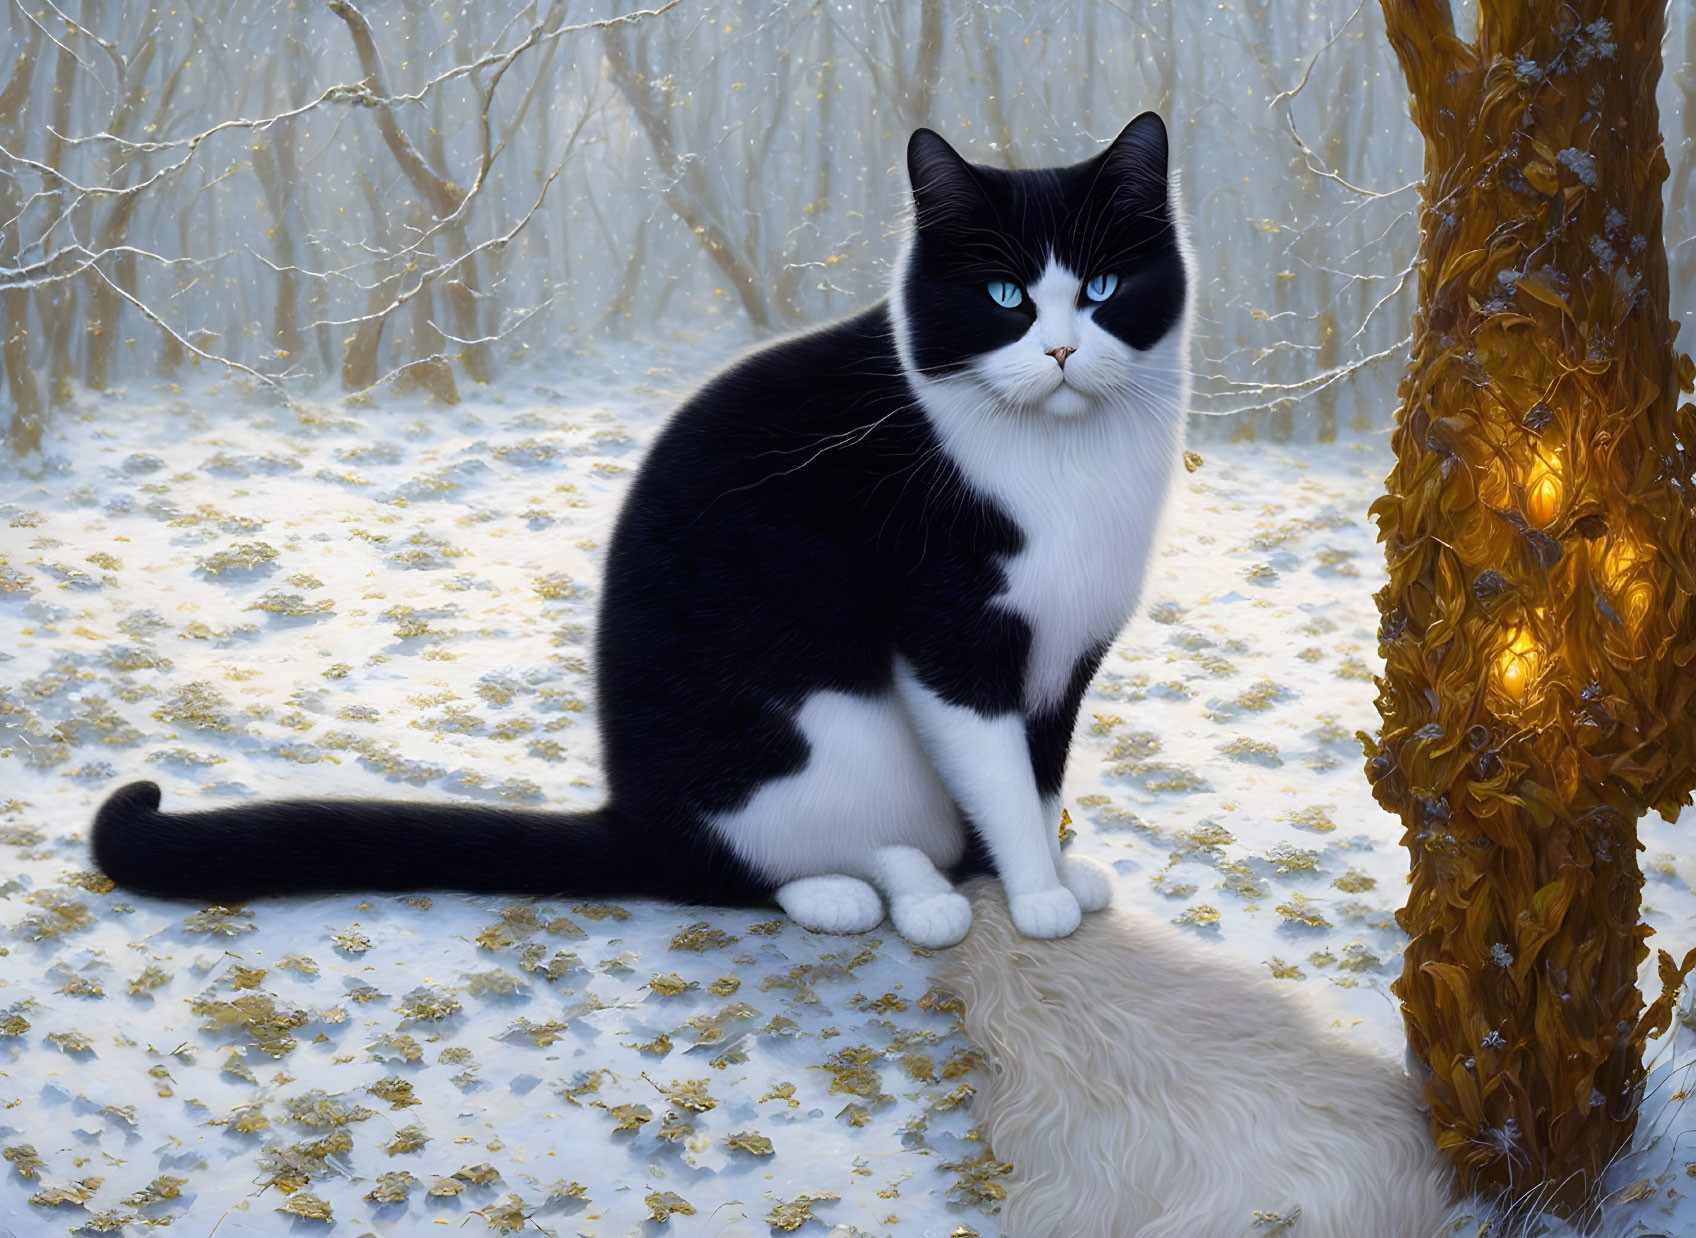 Black and White Cat with Blue Eyes in Snowy Landscape with Golden Leaves